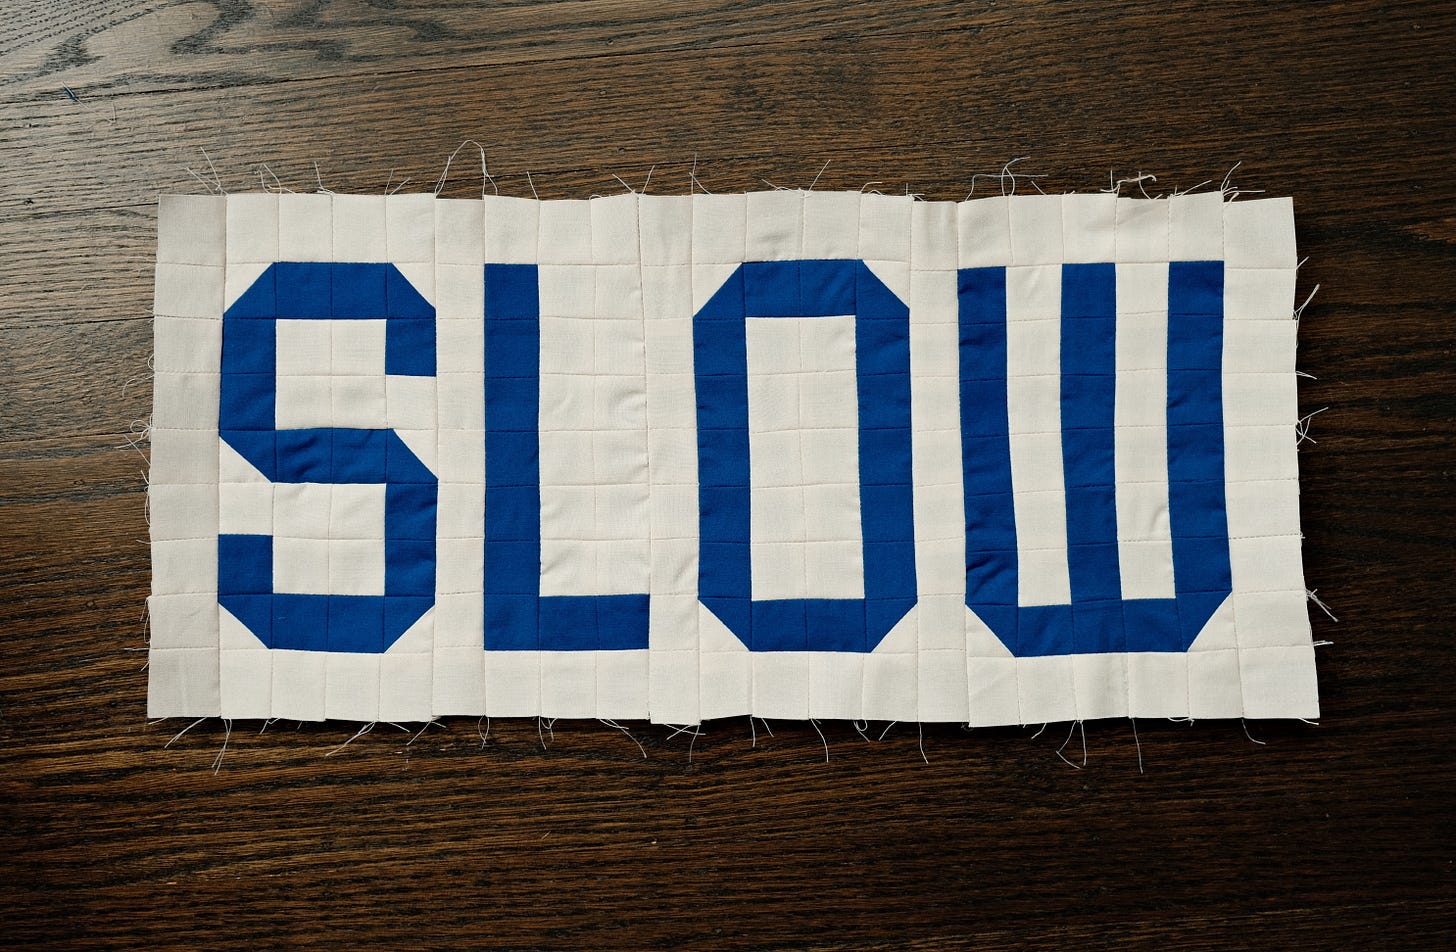 A work in progress of a quilted artwork, made of blue and white squares where the blue spells out the word "SLOW"